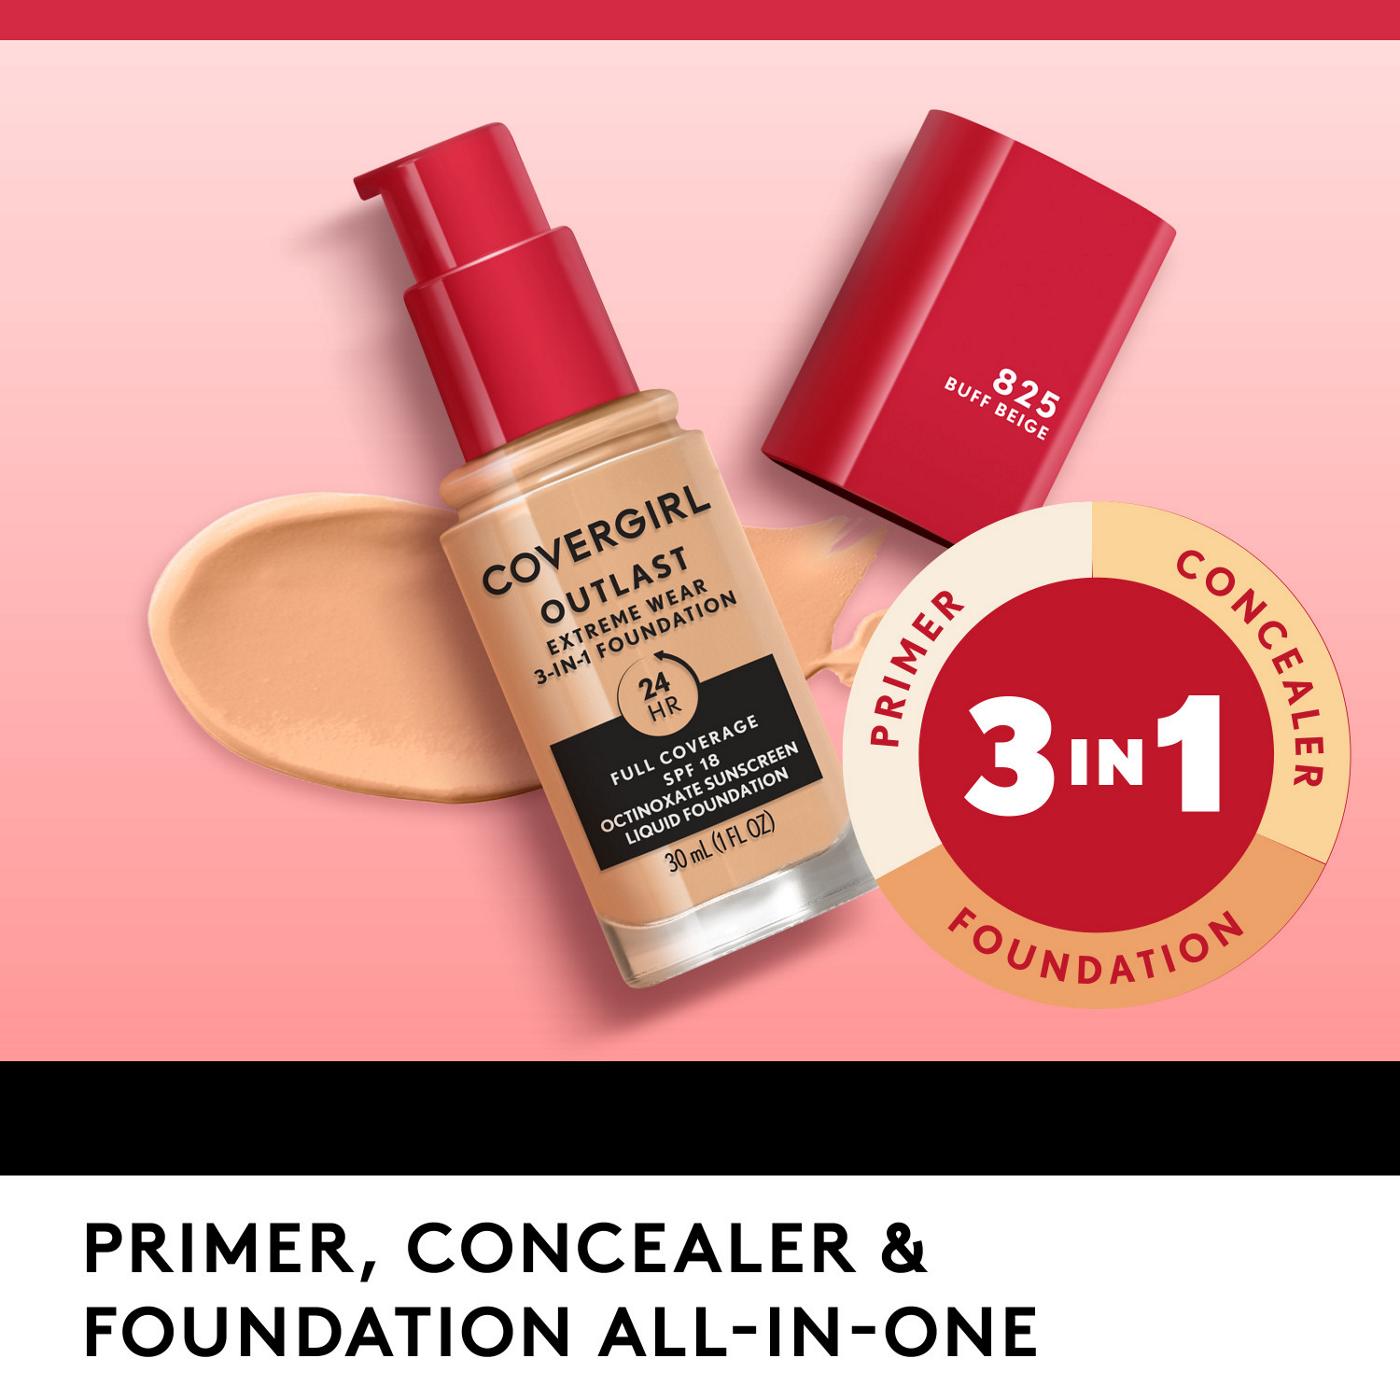 Covergirl Outlast Extreme Wear Liquid Foundation 817 Golden Natural; image 8 of 11